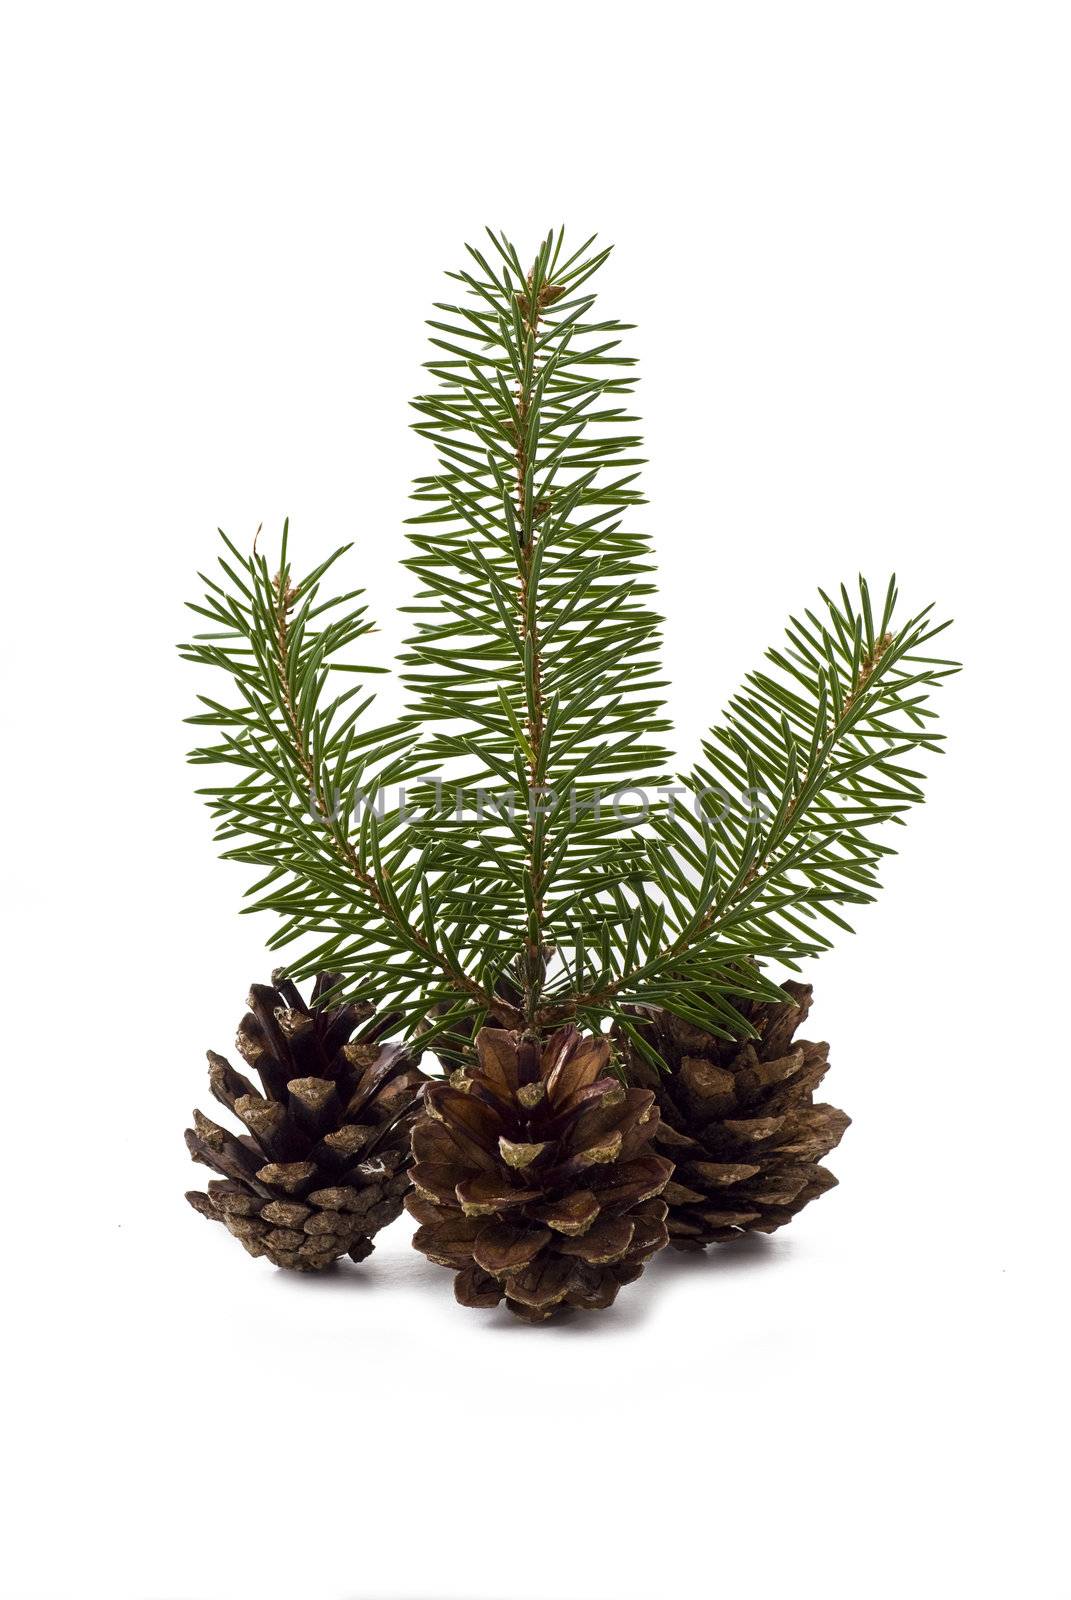 Cones with a sprig of spruce on the white background